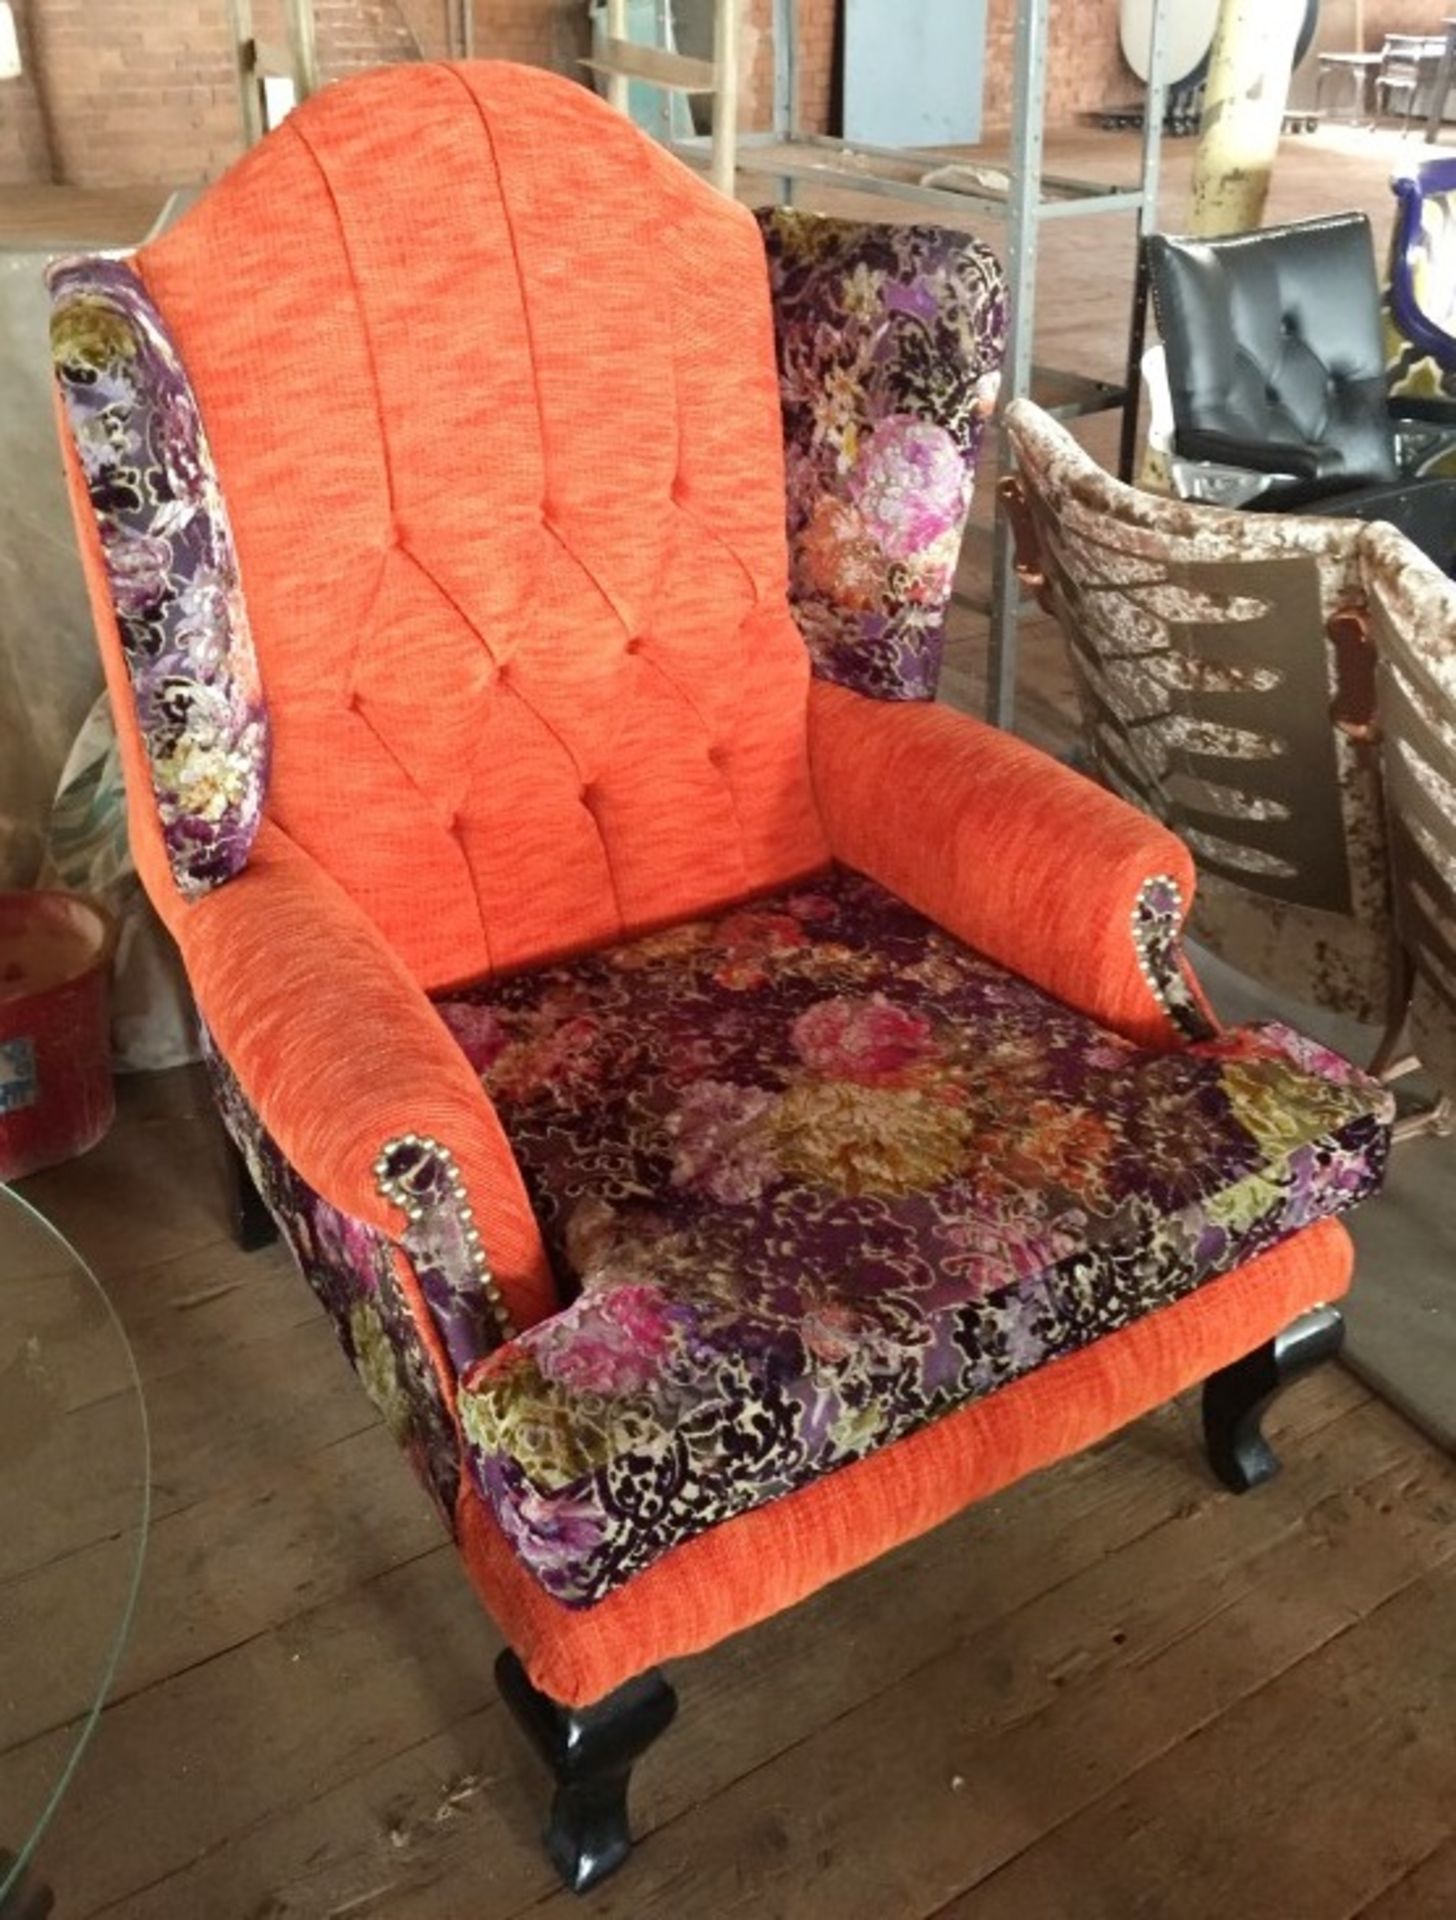 1 x Bespoke Handcrafted Wingback Chair In Upholstered In Luxury Orange & Floral Fabrics -